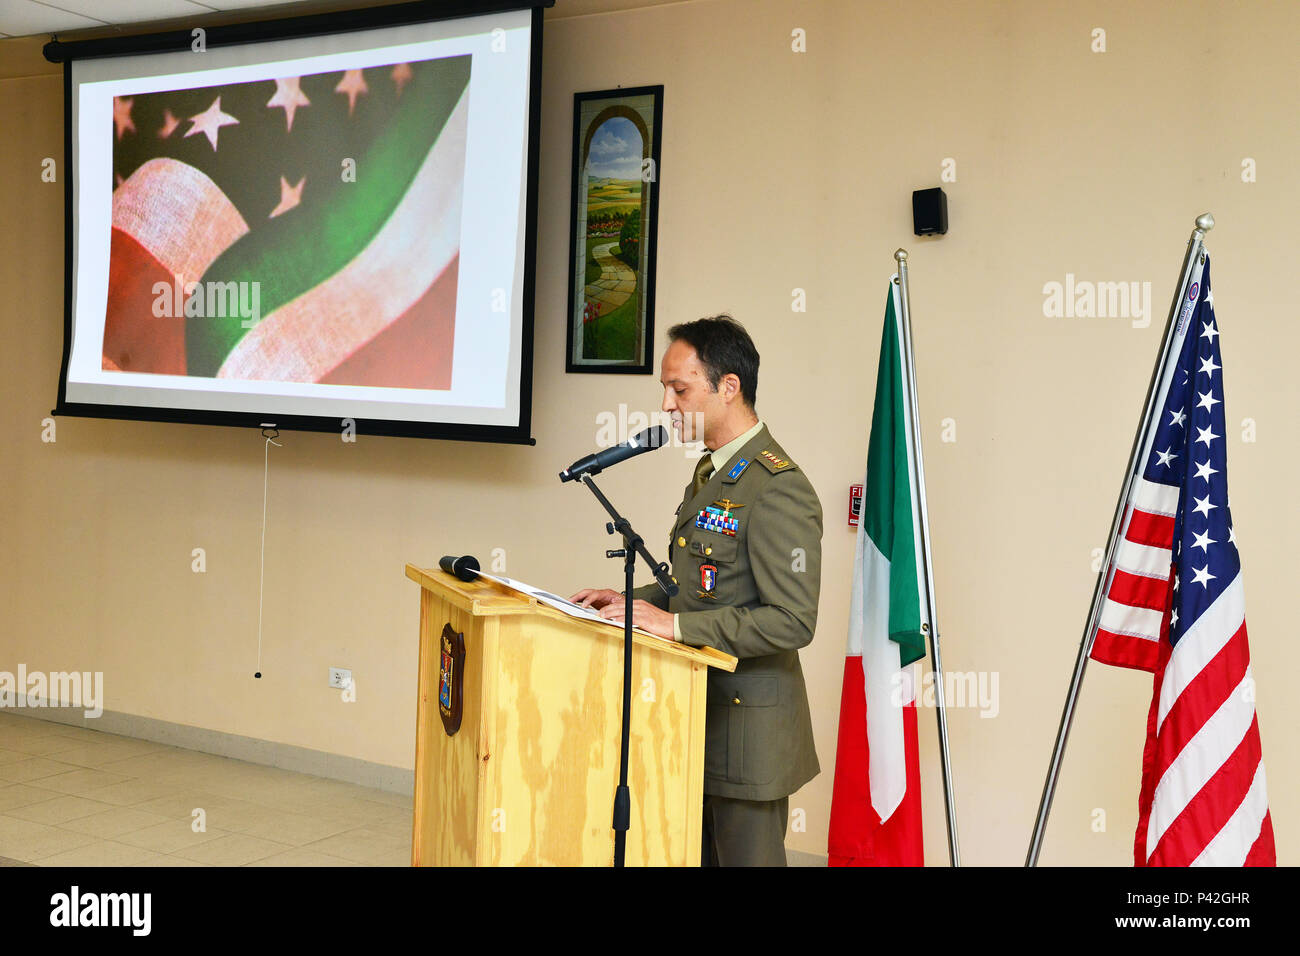 Colonel Umberto D`Andria, Italian Base Commander Caserma Ederle, addresses the audience during the celebration for the Italian Republic Day 2016, June 6, 2016 on Caserma Ederle, Vicenza, Italy. (U.S. Army photo by Visual Information Specialist  Paolo Bovo/released) Stock Photo